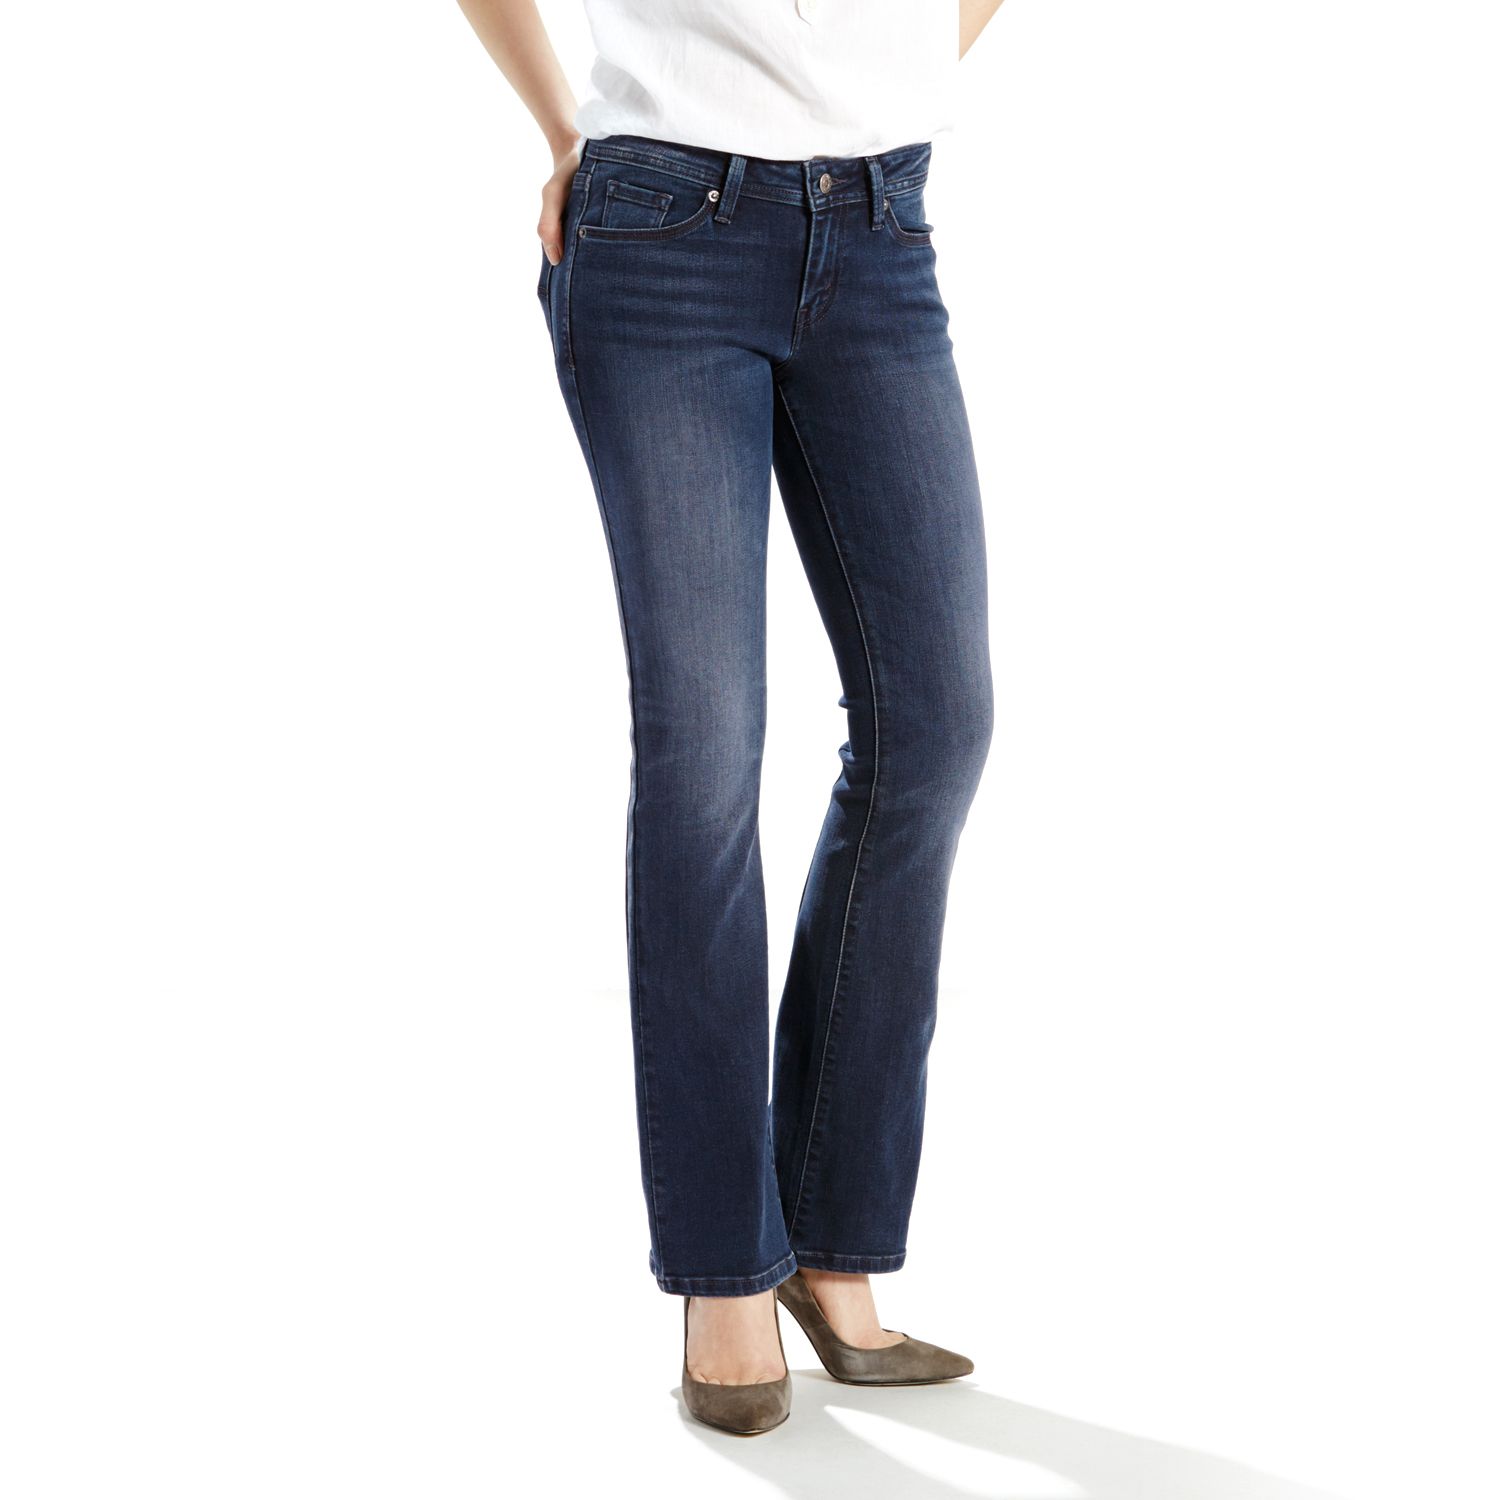 levi's 529 curvy style bootcut jeans